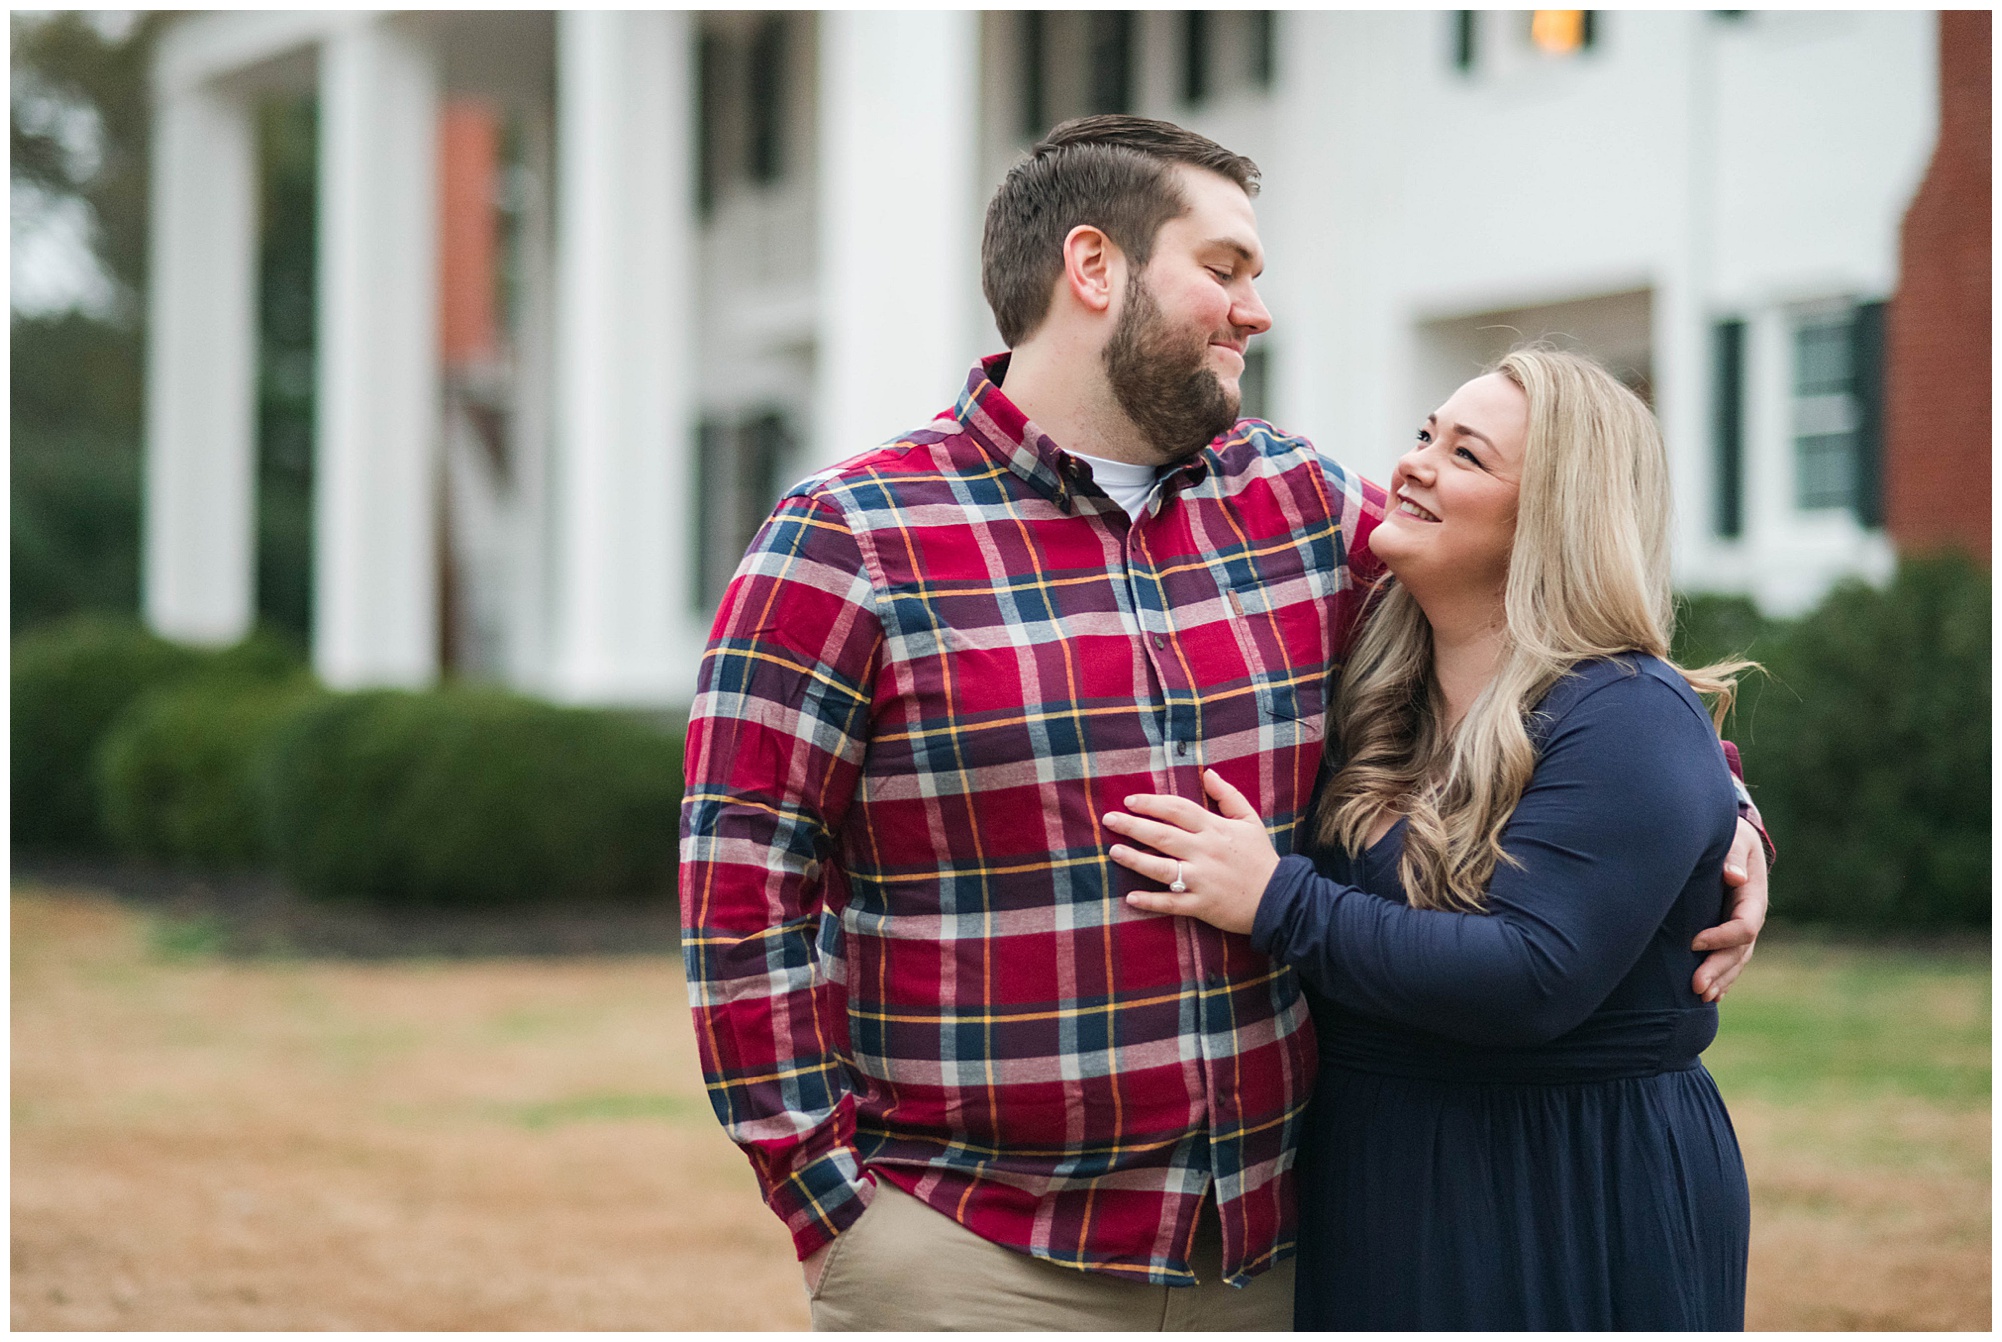 hollyfield farm engagement session with kaitlyn and jonathan in november. by richmond rva virginia wedding and engagement photographer, Sarah & Dave Photography